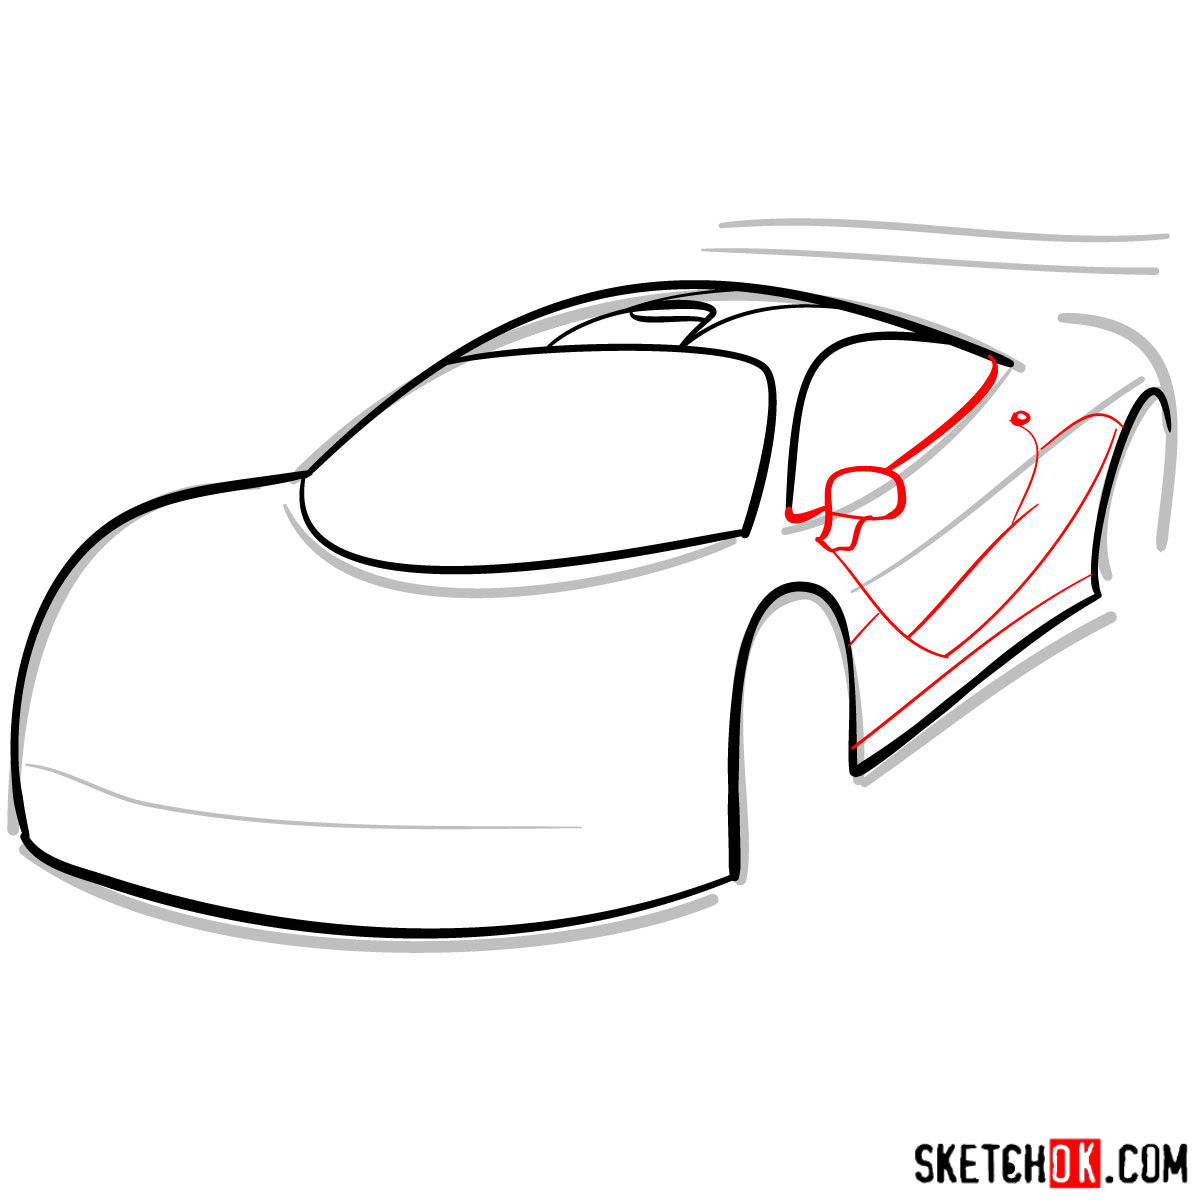 McLaren F1 - step by step drawing guide - step 06